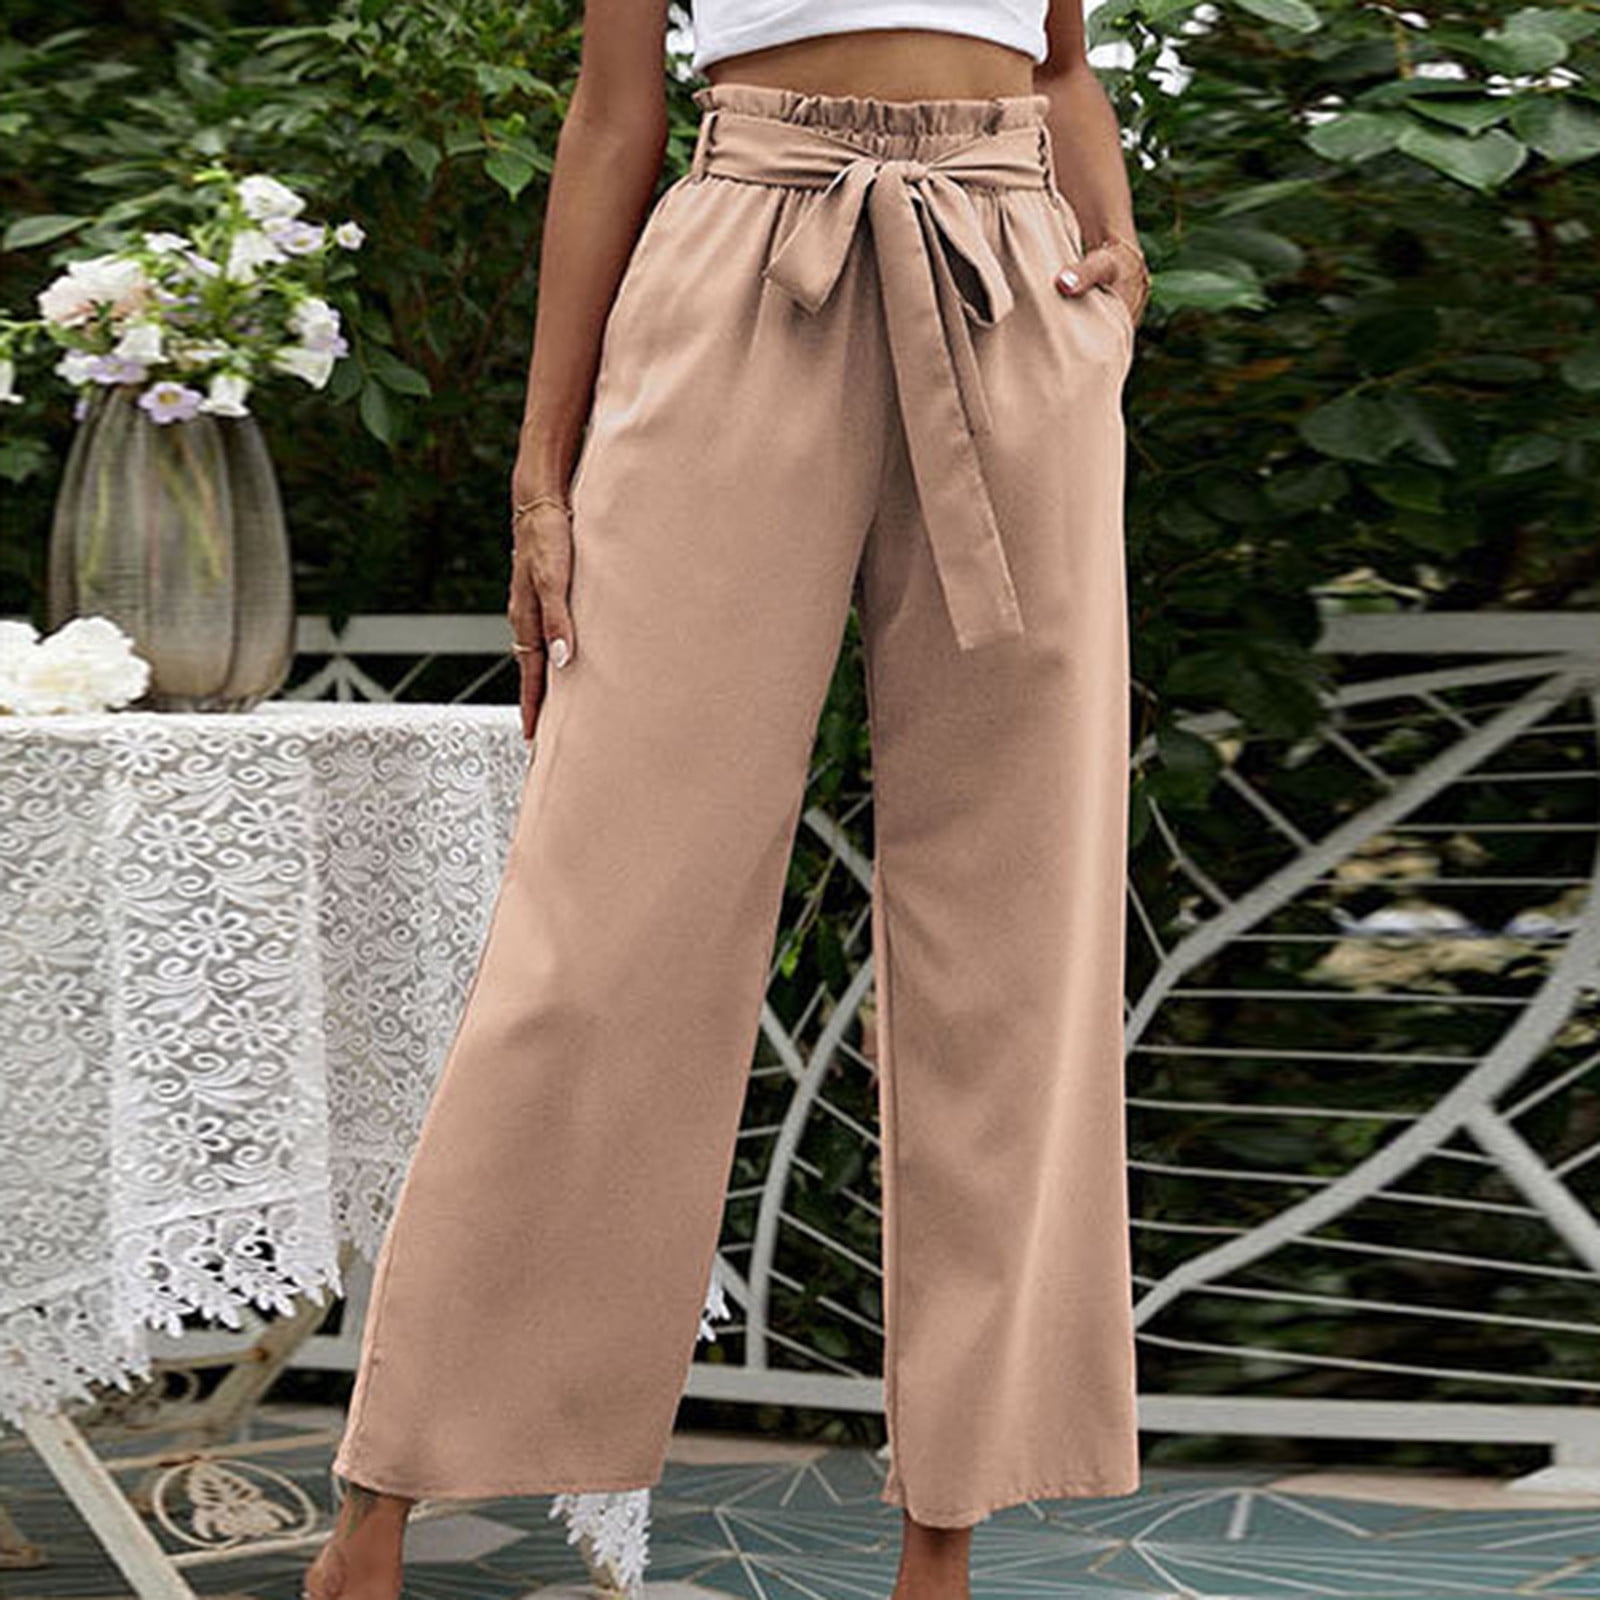 Gaecuw Palazzo Pants for Women Dressy Relaxed Fit Long Pants